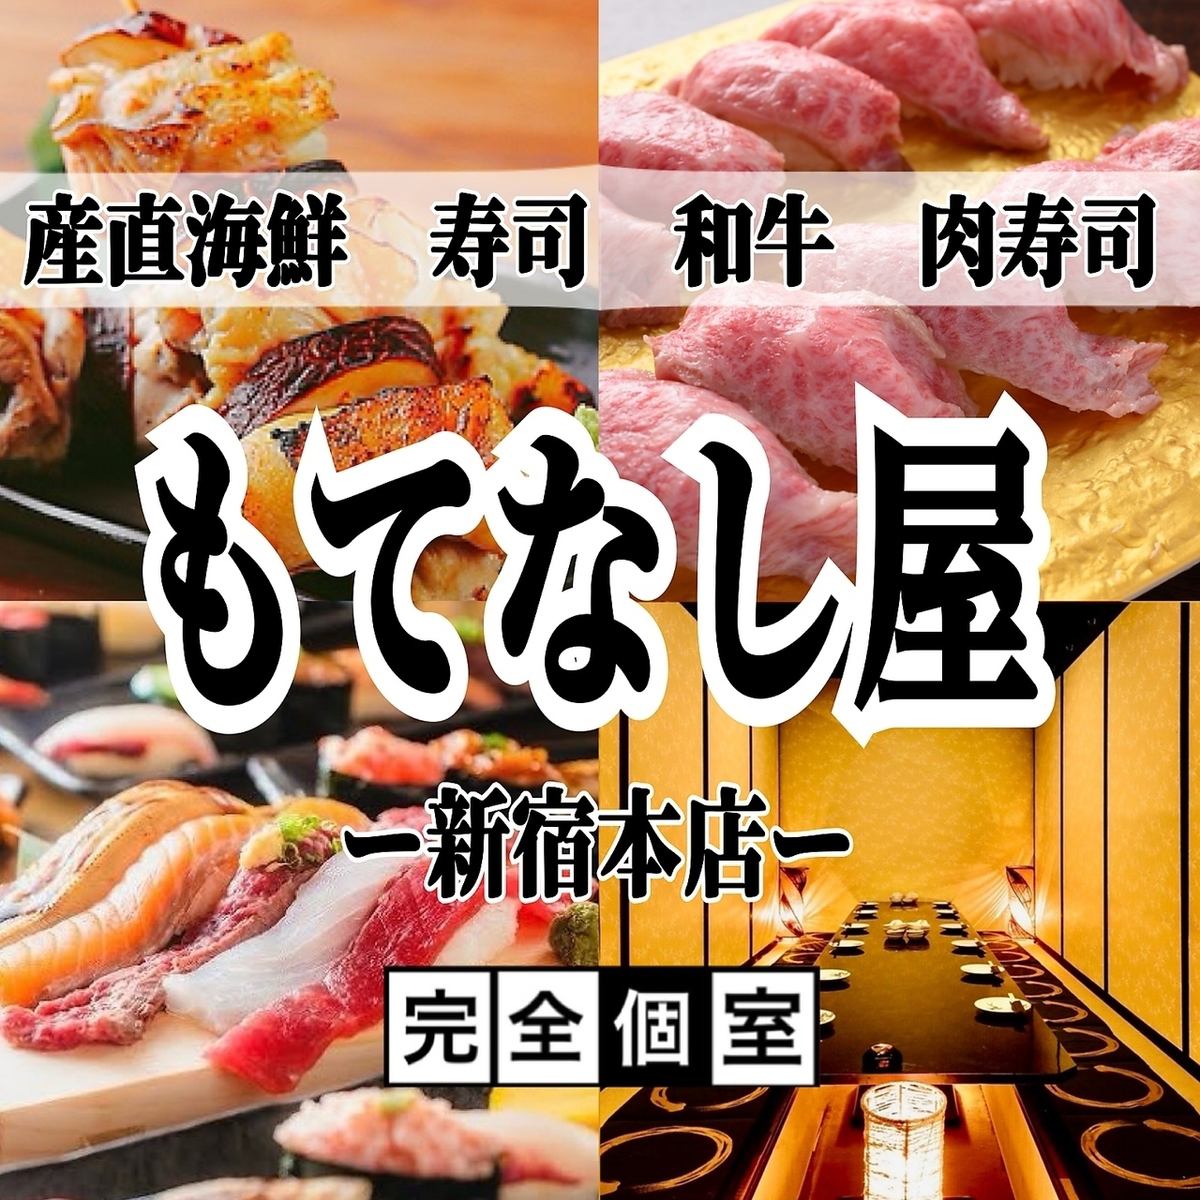 ★1 minute walk from Shinjuku Station Authentic cuisine available in all-you-can-eat and drink plan ♪ From 2,480 yen for 3 hours